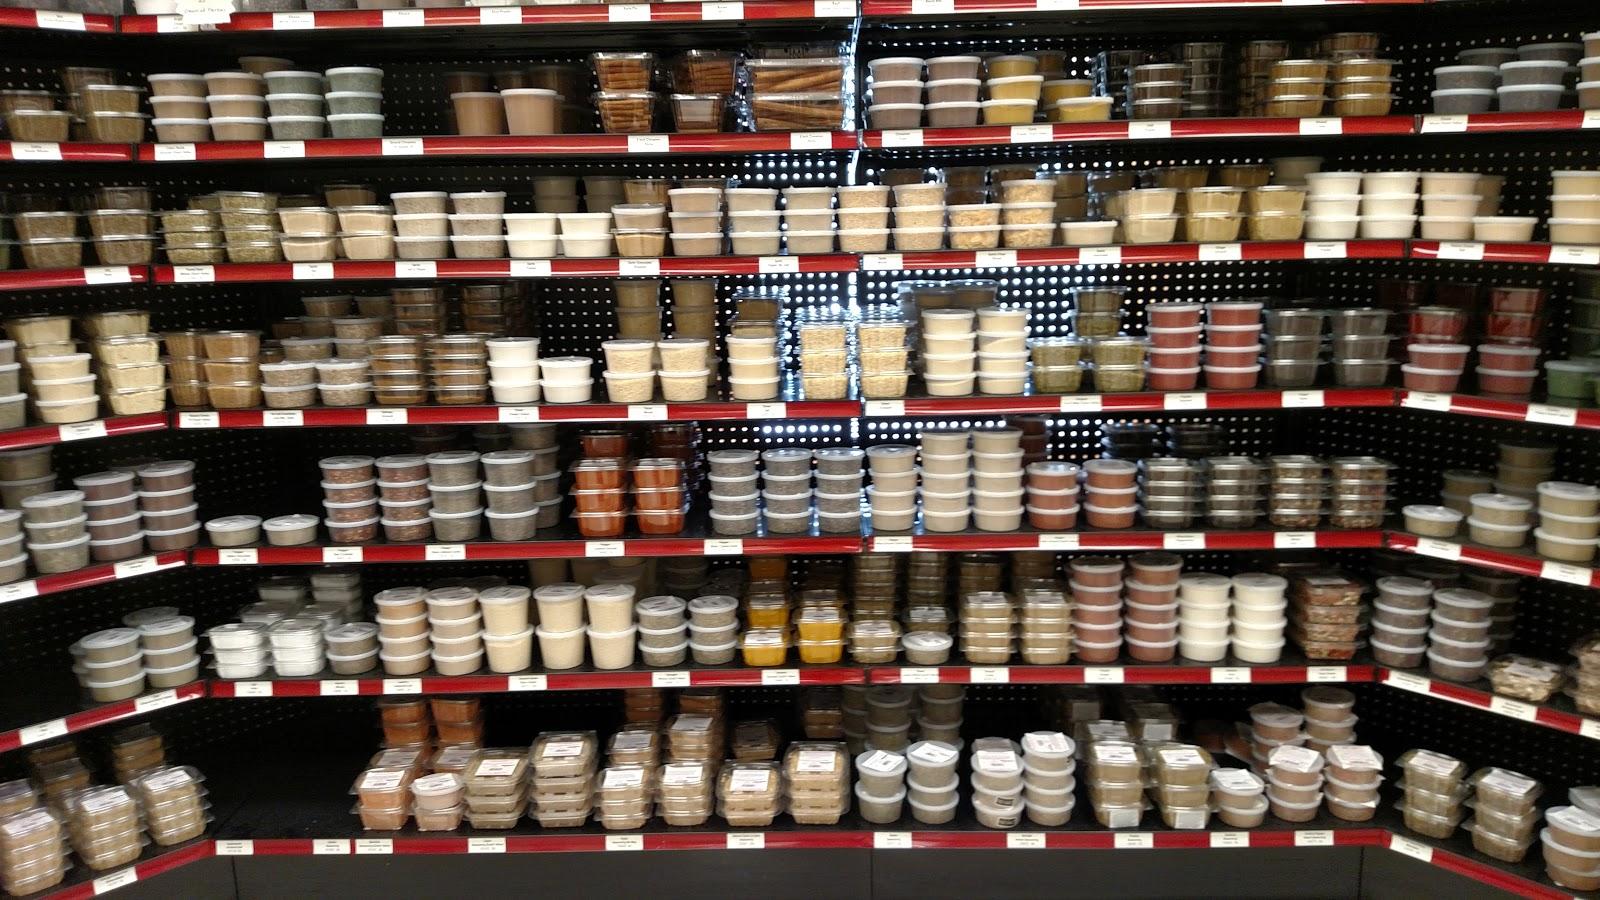 This is the “spice room” at Windy Knoll Market, Chambersburg, PA. Note how the black shelving sets off the color and design of the containers.